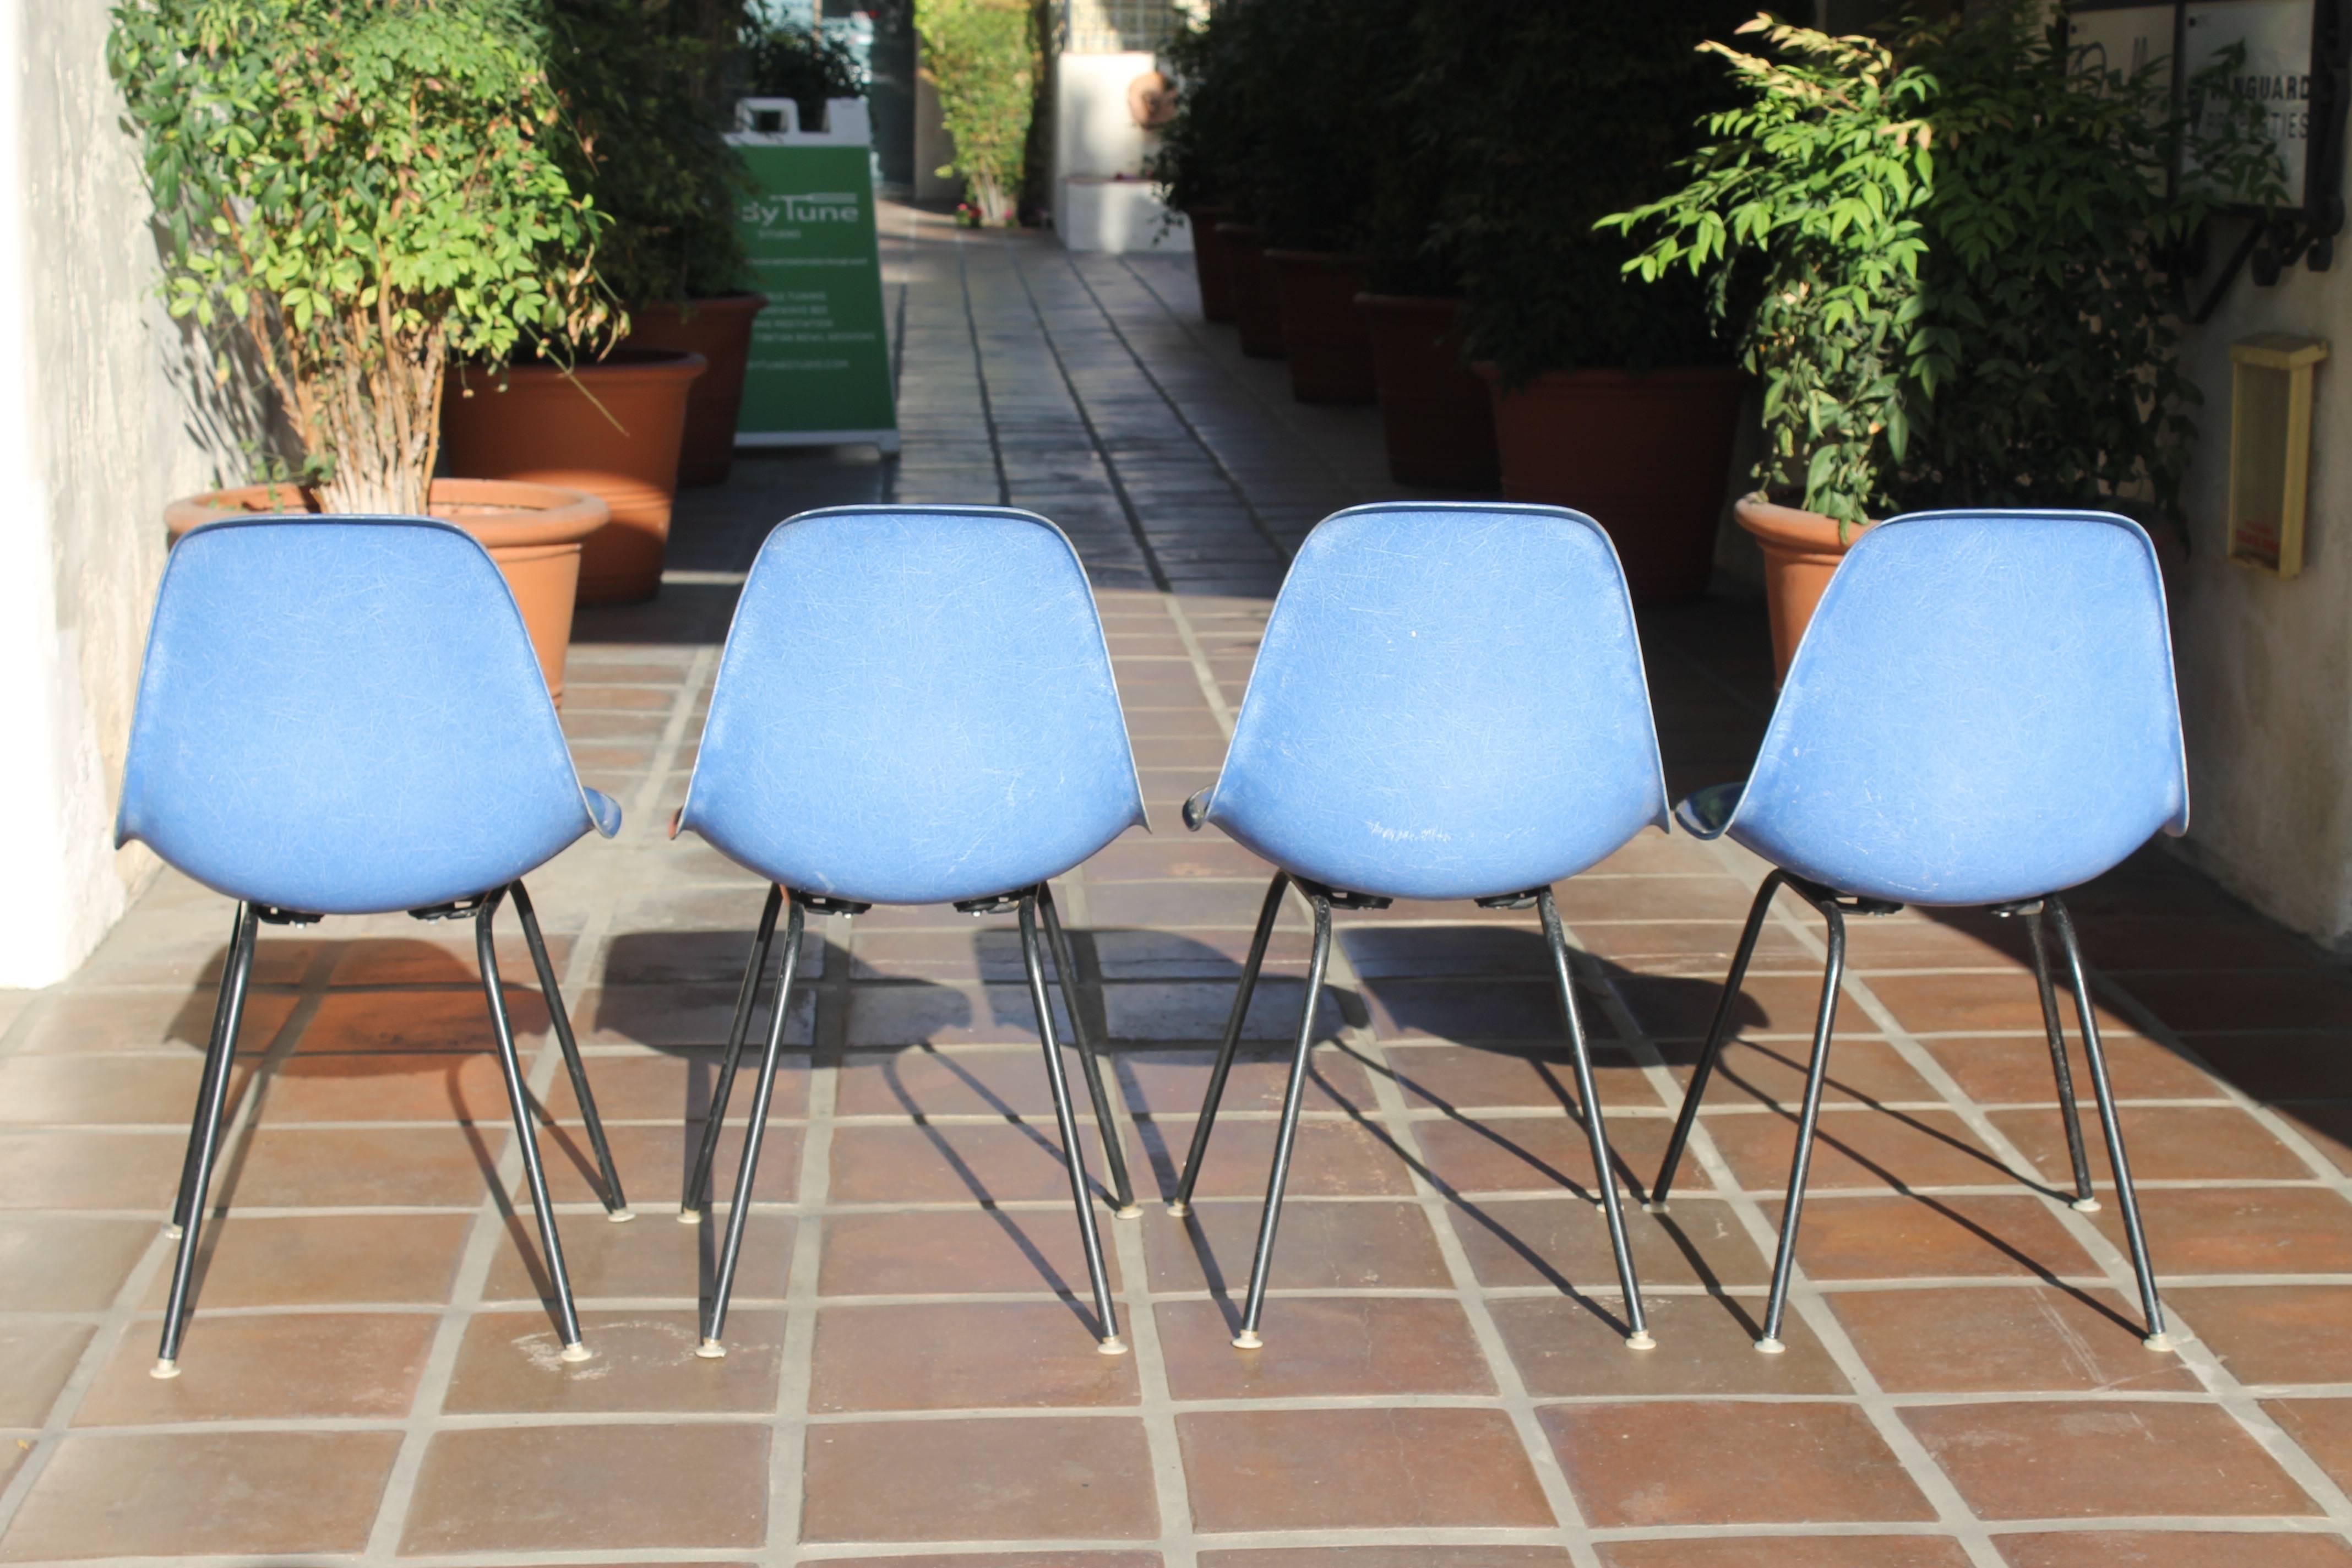 American Set of Four Eames Blue Fiberglass Side Chairs